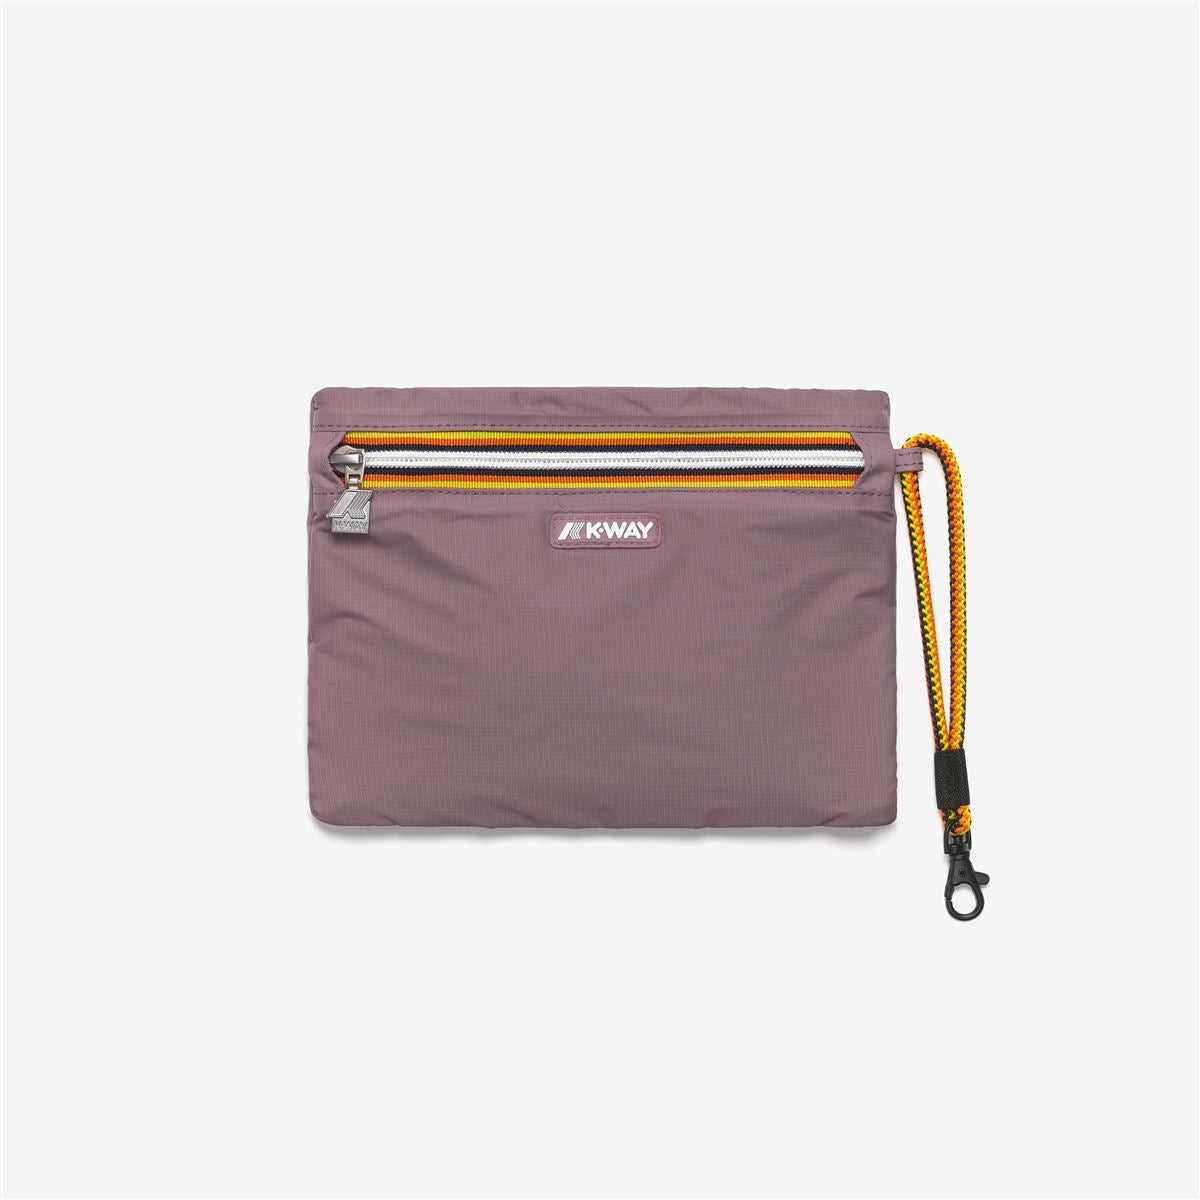 NIMES - SMALL ACCESSORIES - UNISEX - VIOLET DUSTY